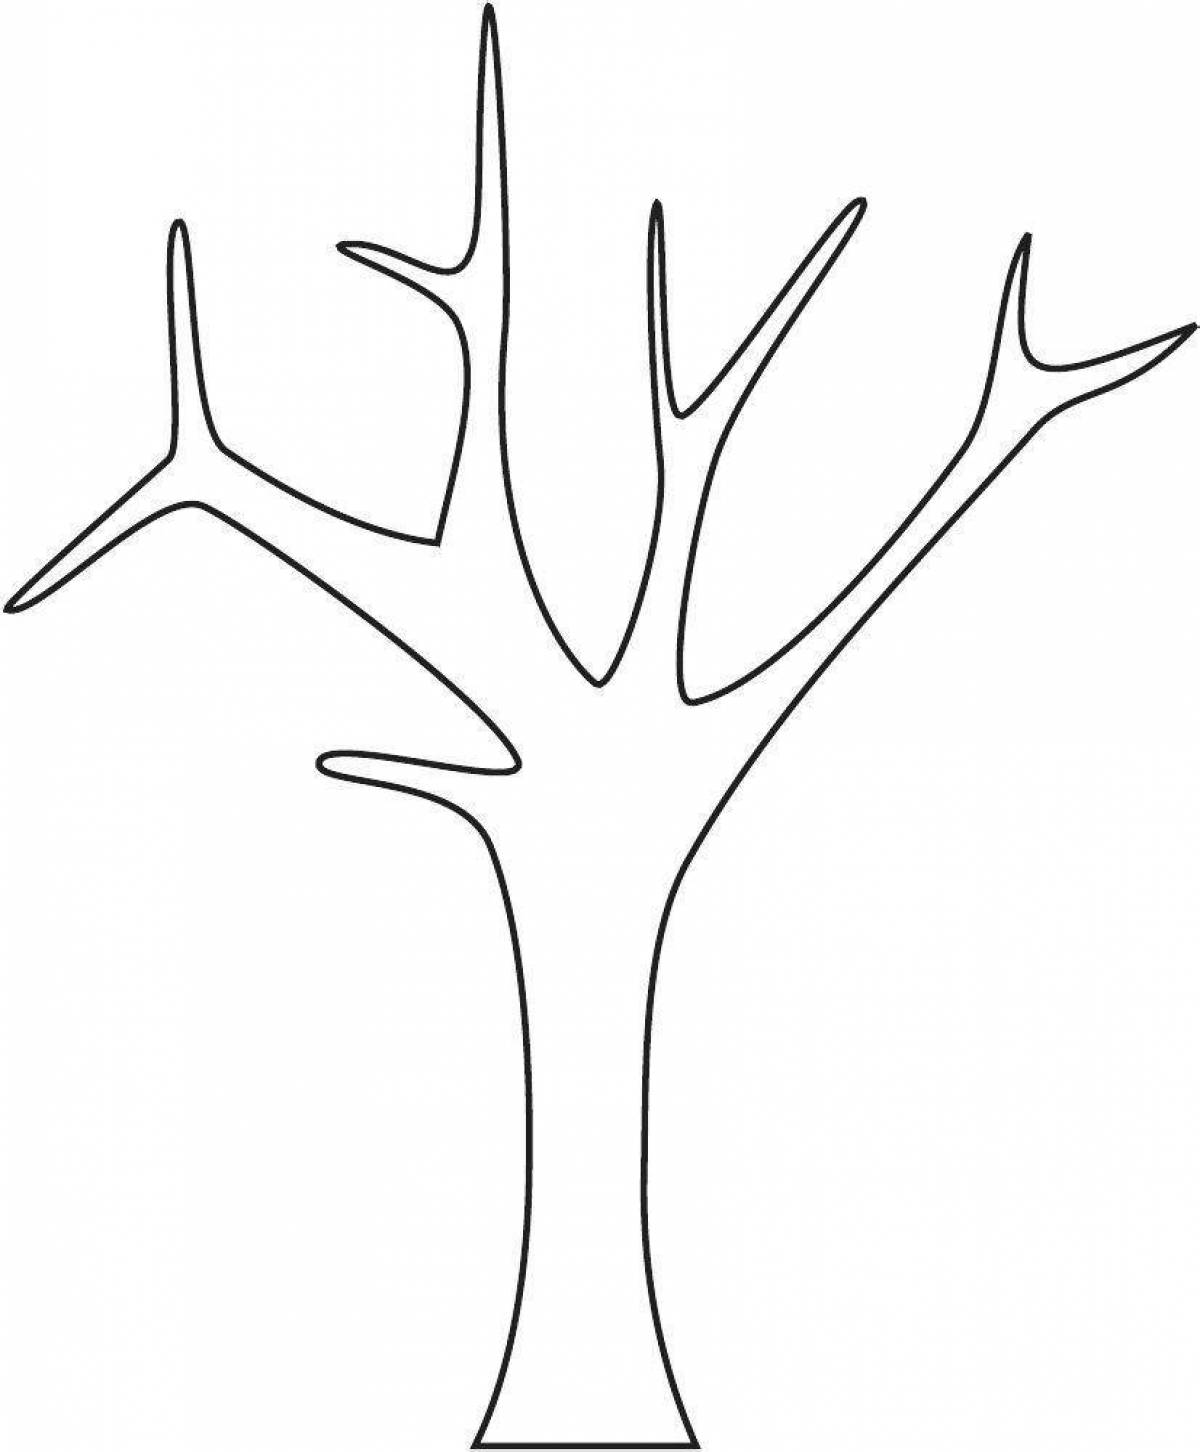 Fun tree without leaves for 3-4 year olds